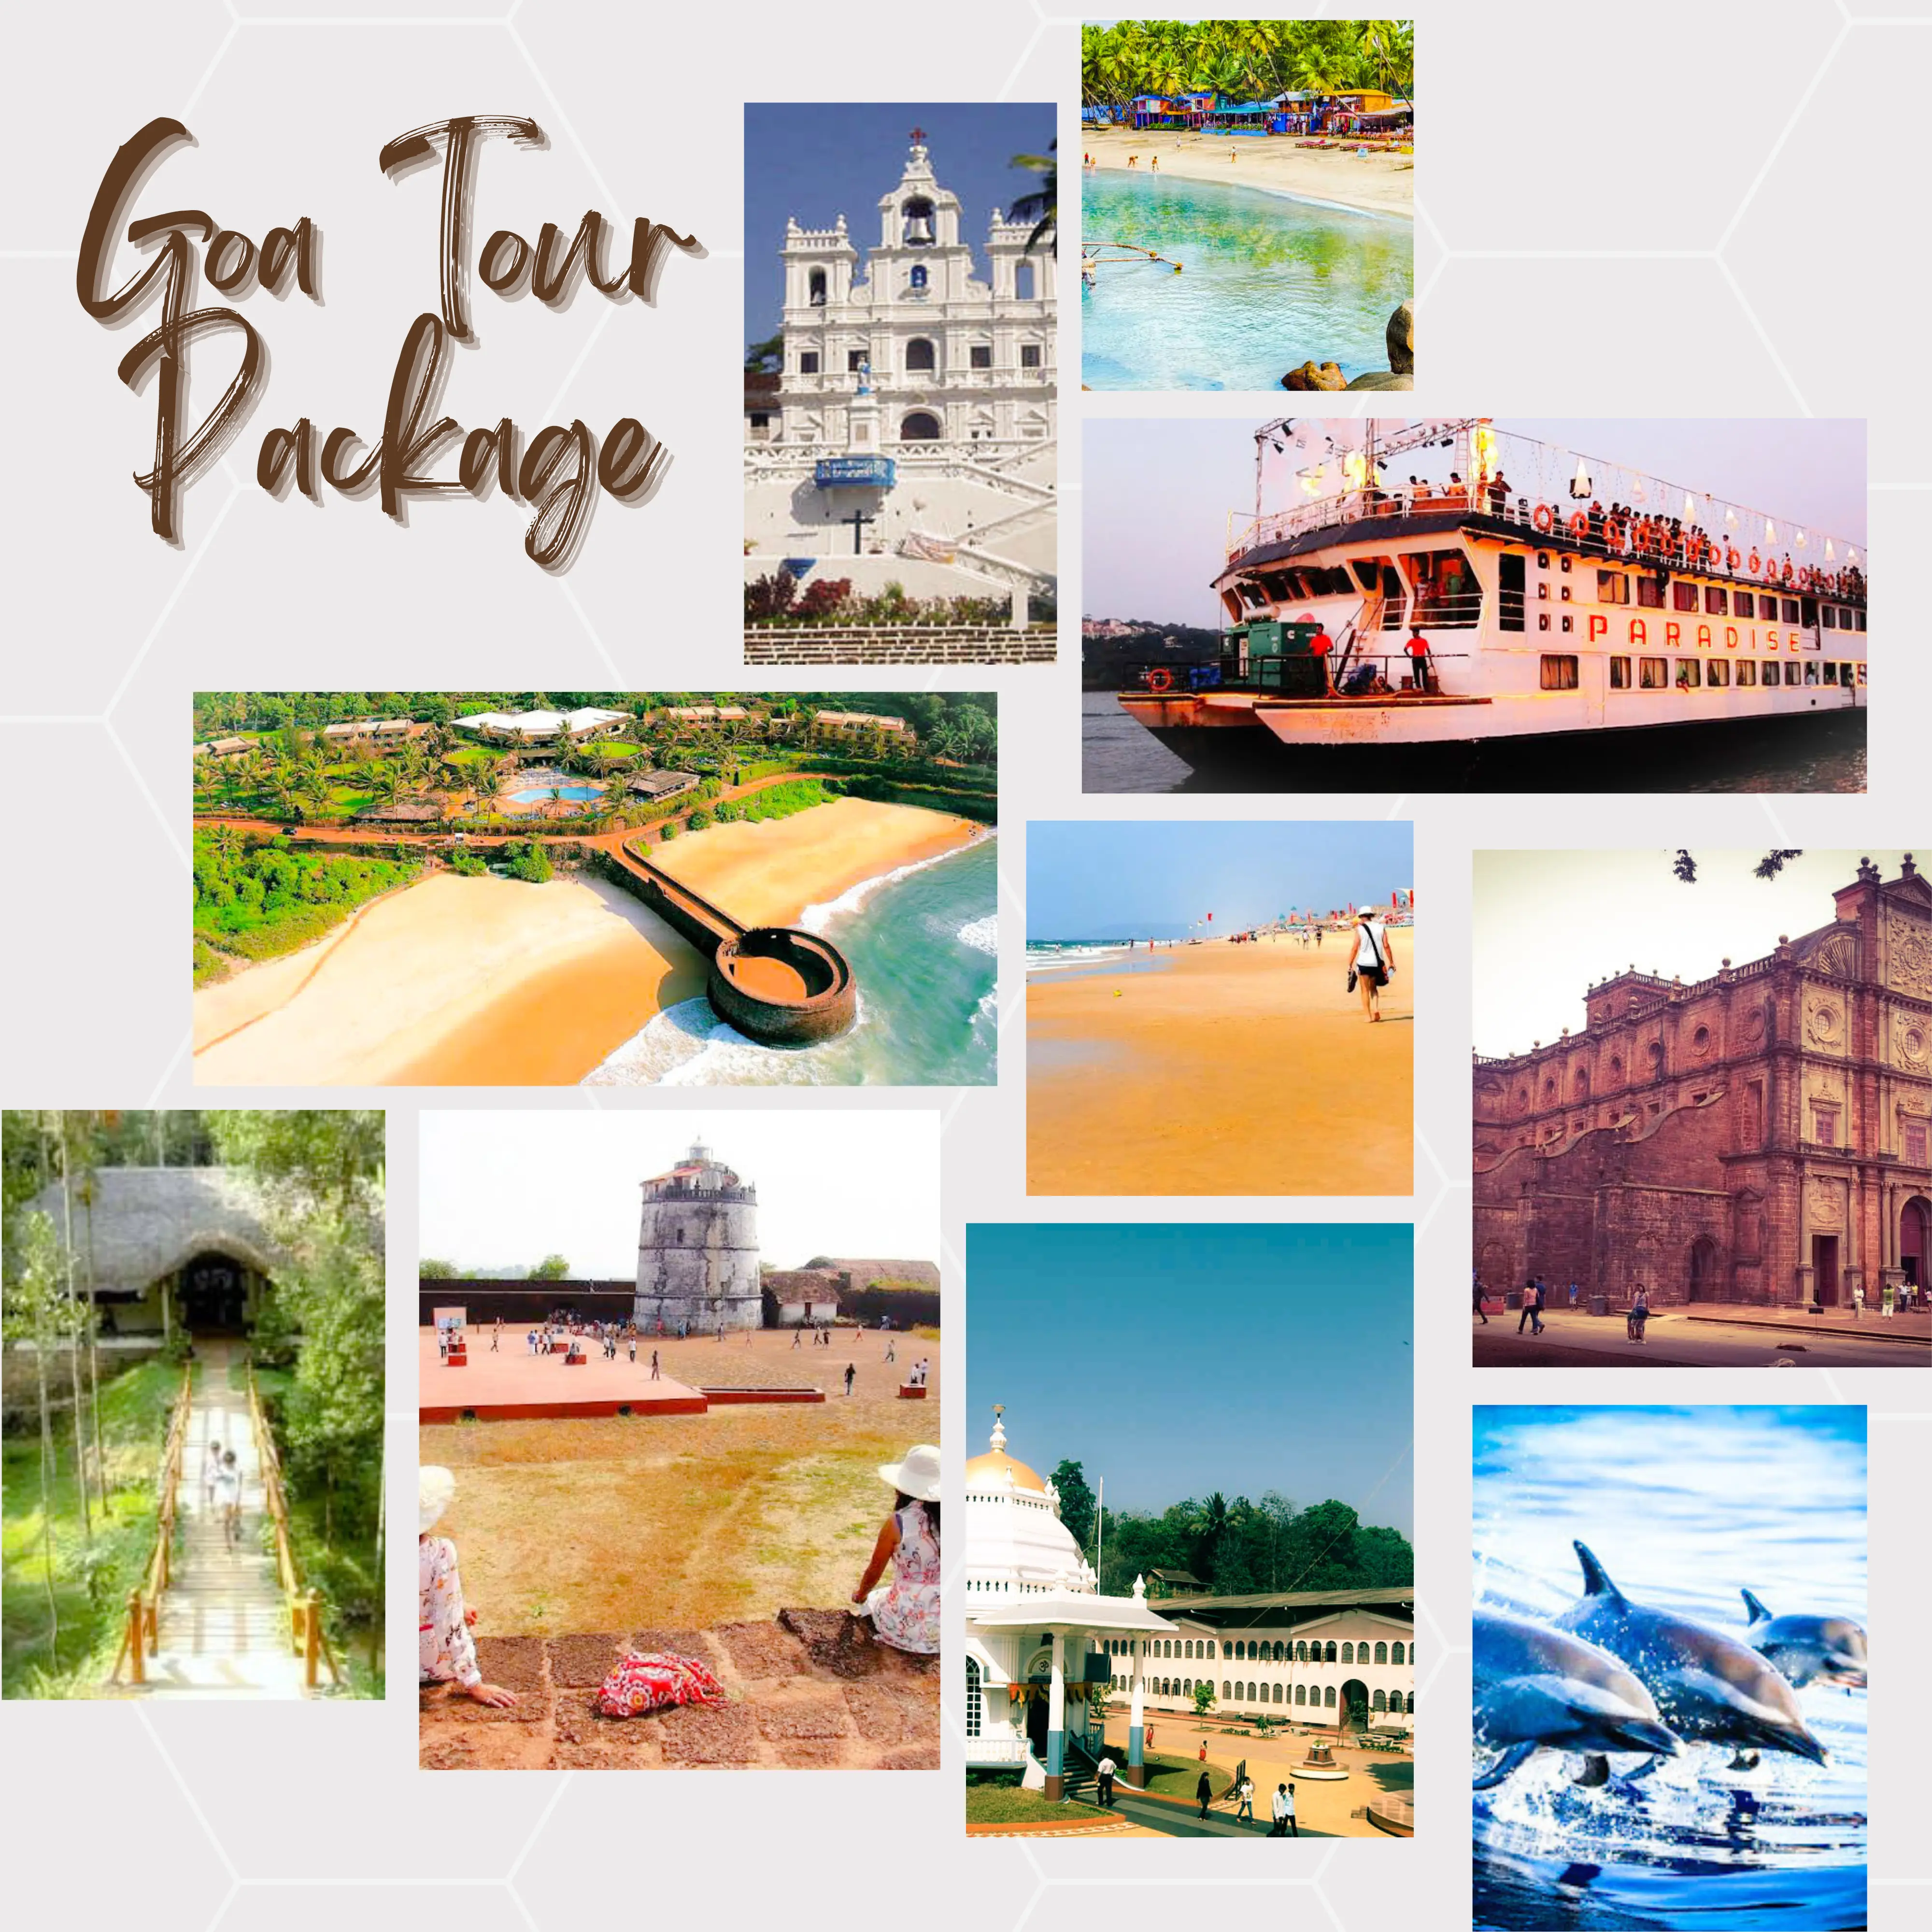 Goa Sightseeing Tour Package